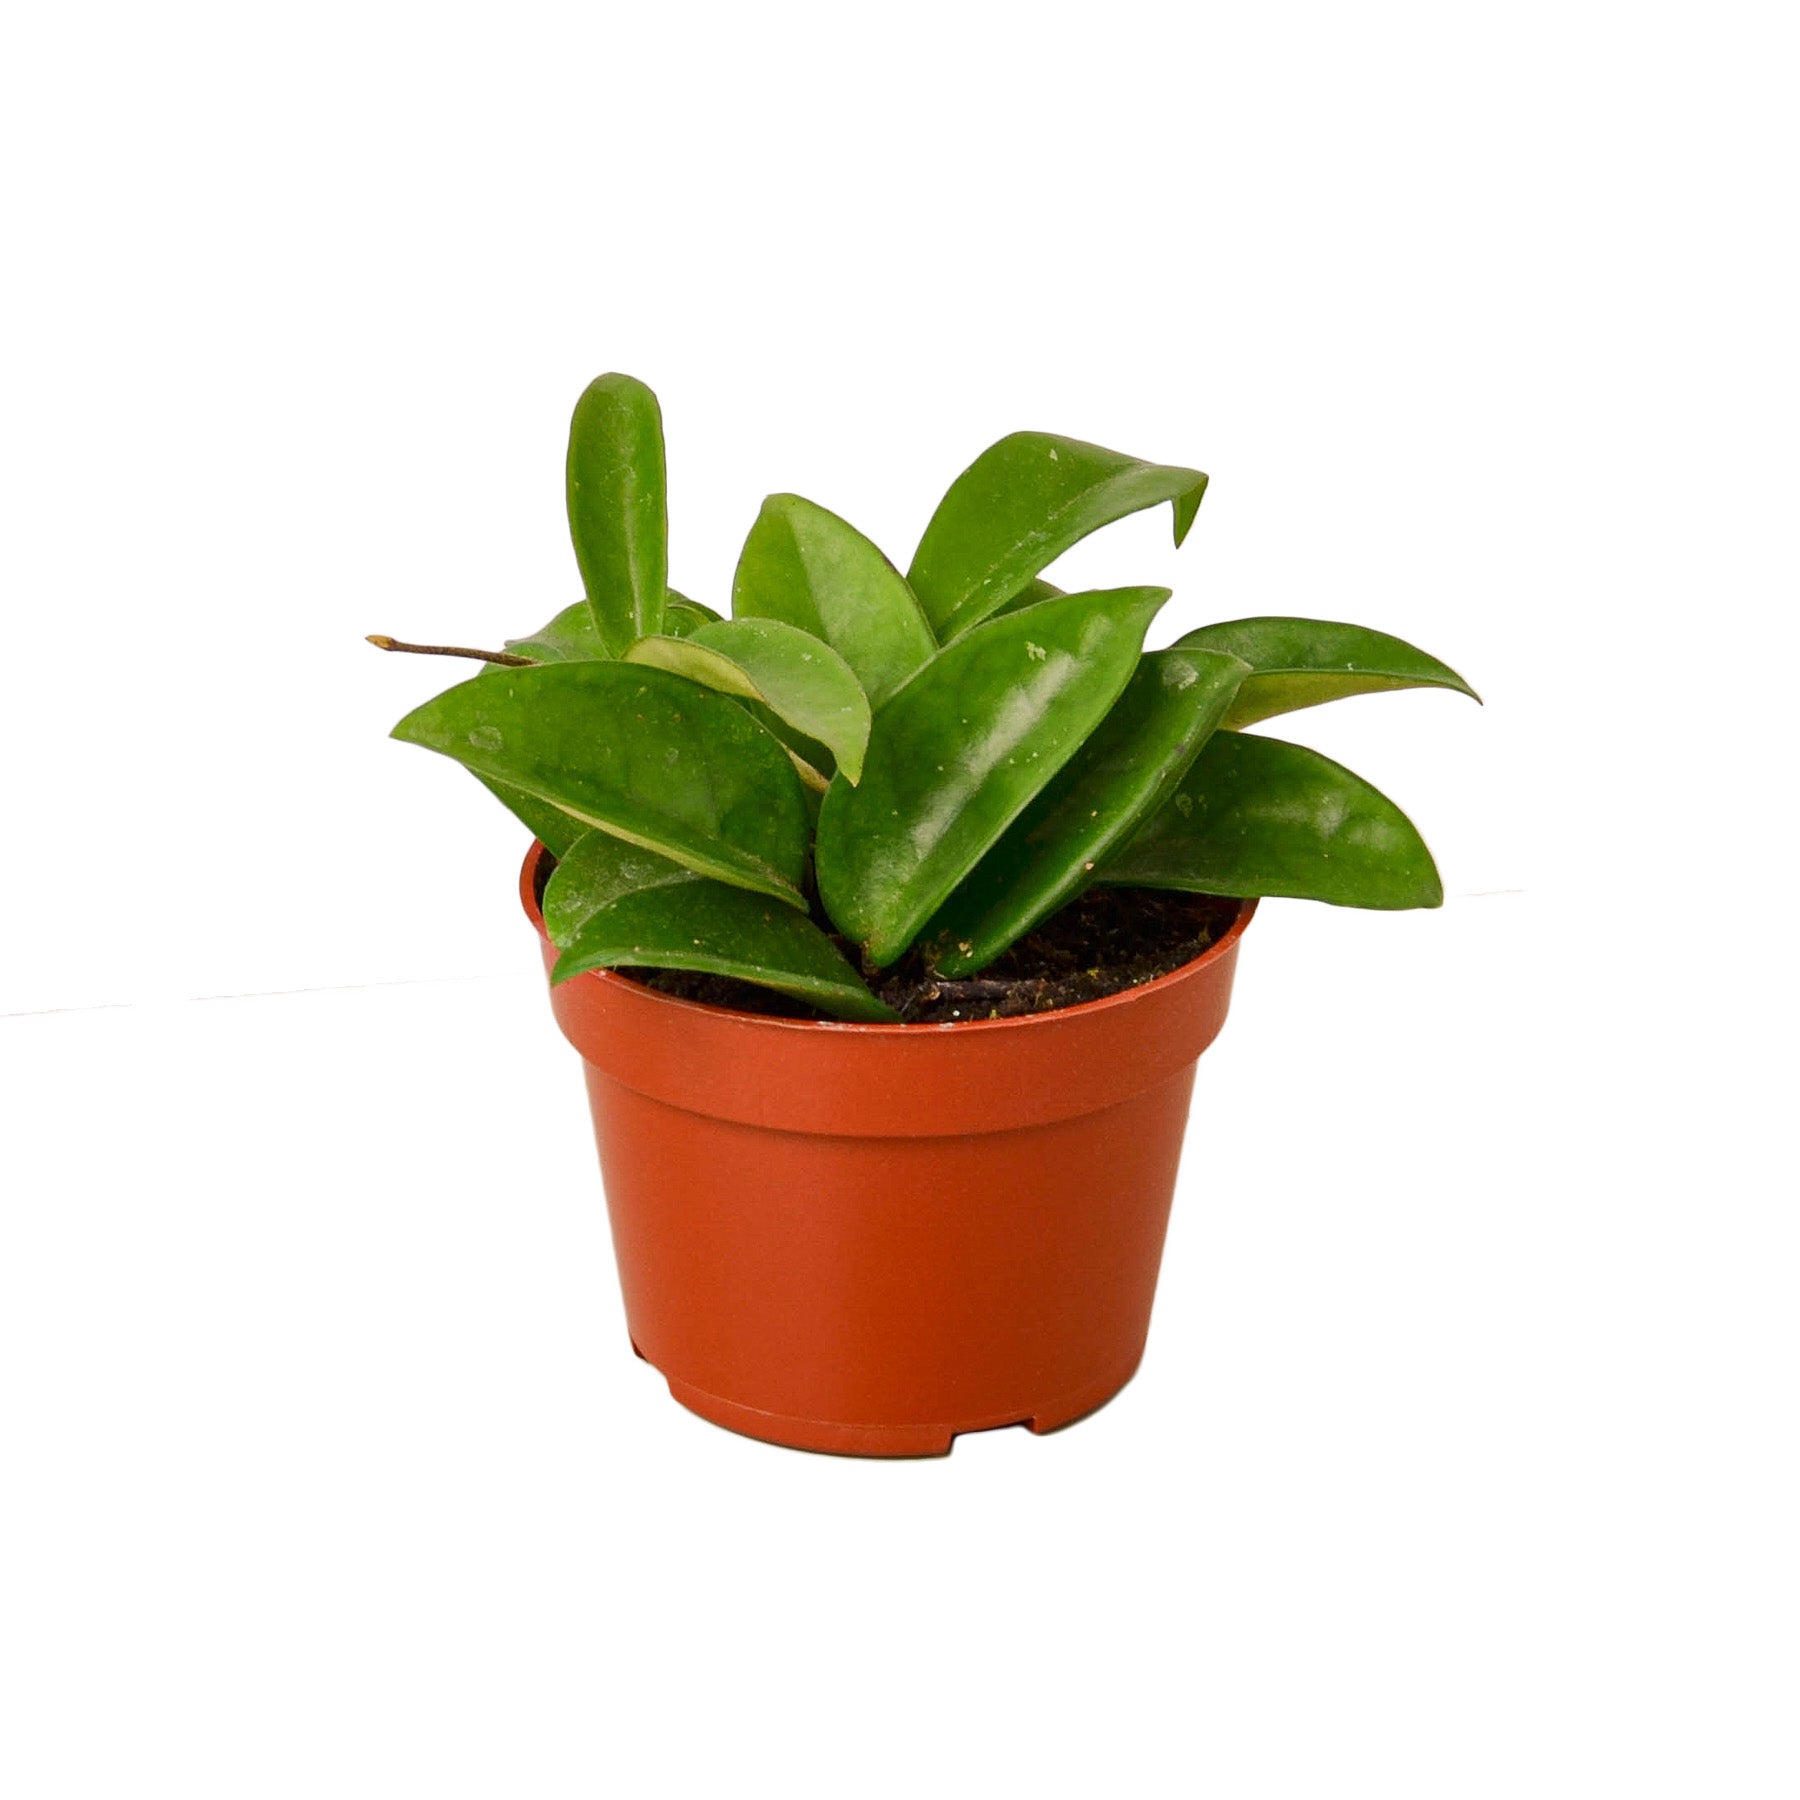 A small plant in a red pot on a white background at the best garden center near me.